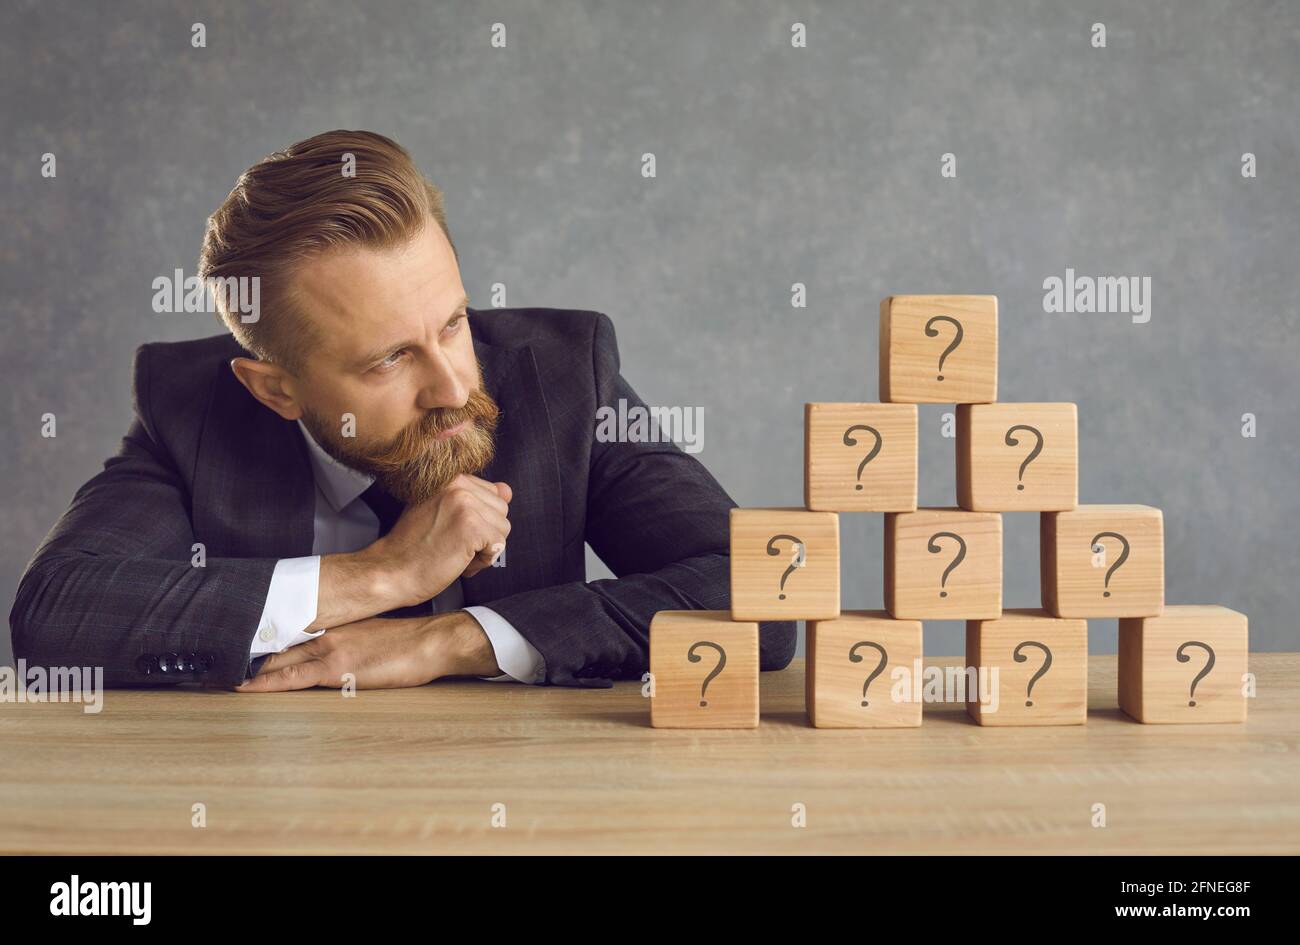 Businessman in suit looking at pyramid of cubes with question marks and thinking of answer Stock Photo